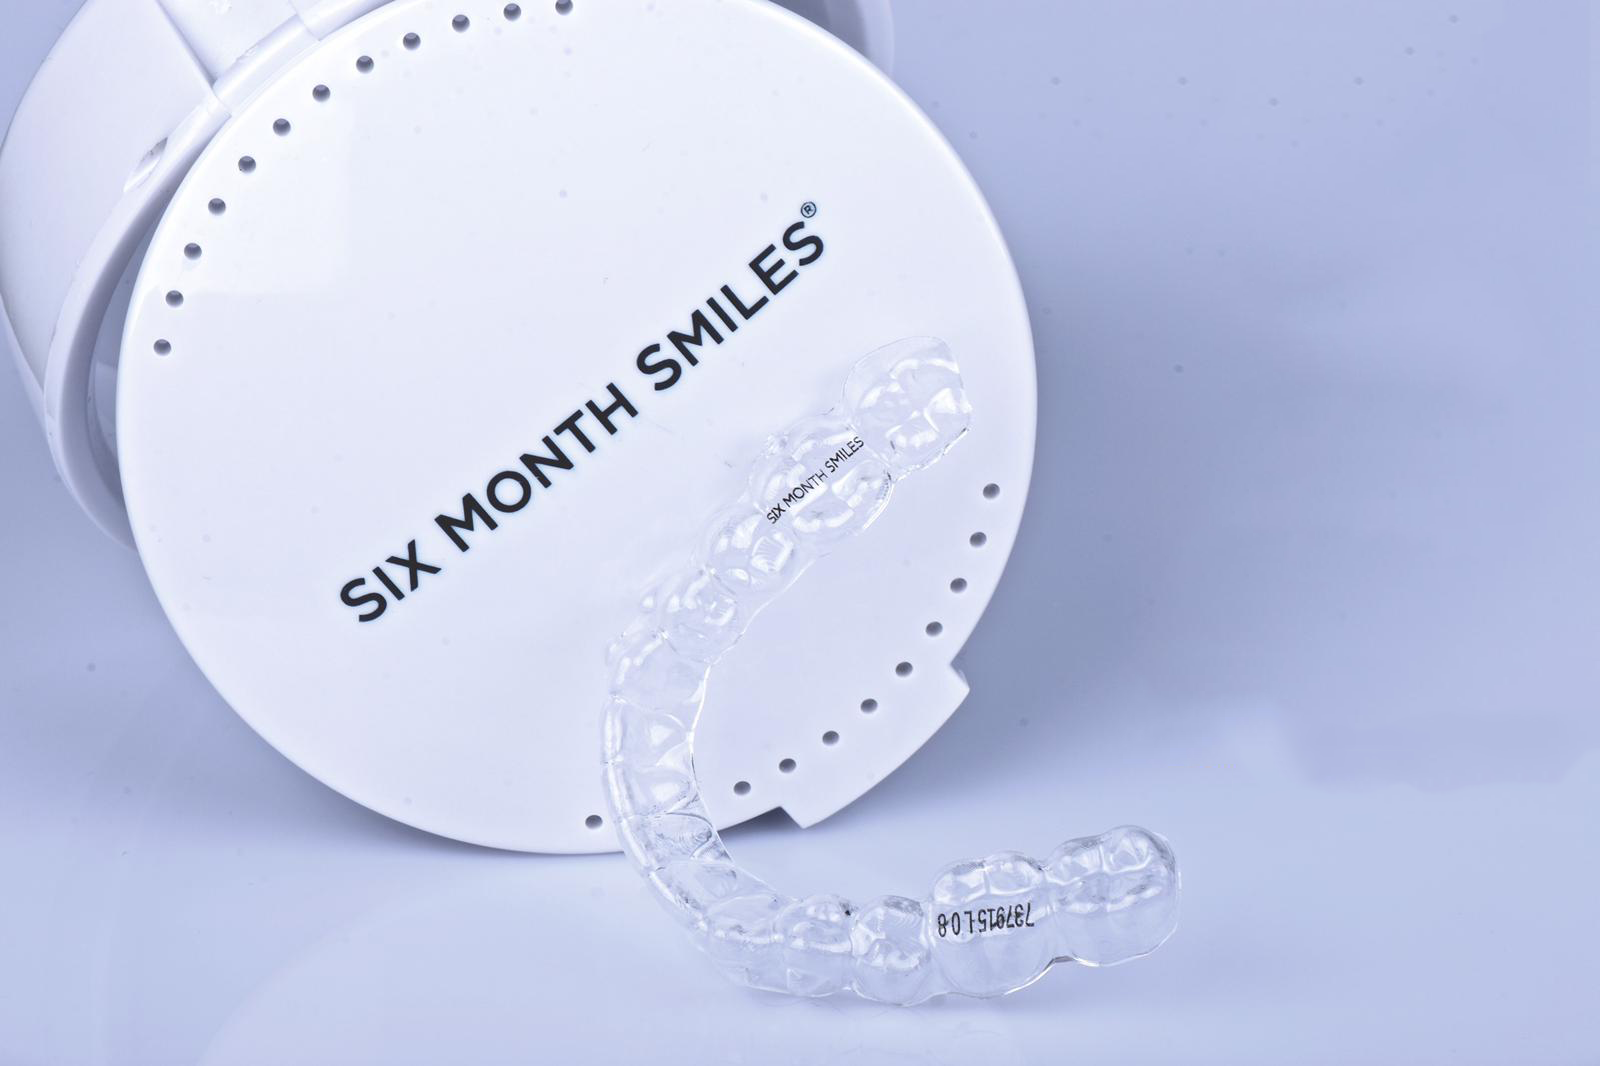 US-BASED SHORT-TERM ORTHODONTICS COMPANY TACKLES LEADING DIY AND CLEAR ALIGNER MANUFACTURERS HEAD-ON.